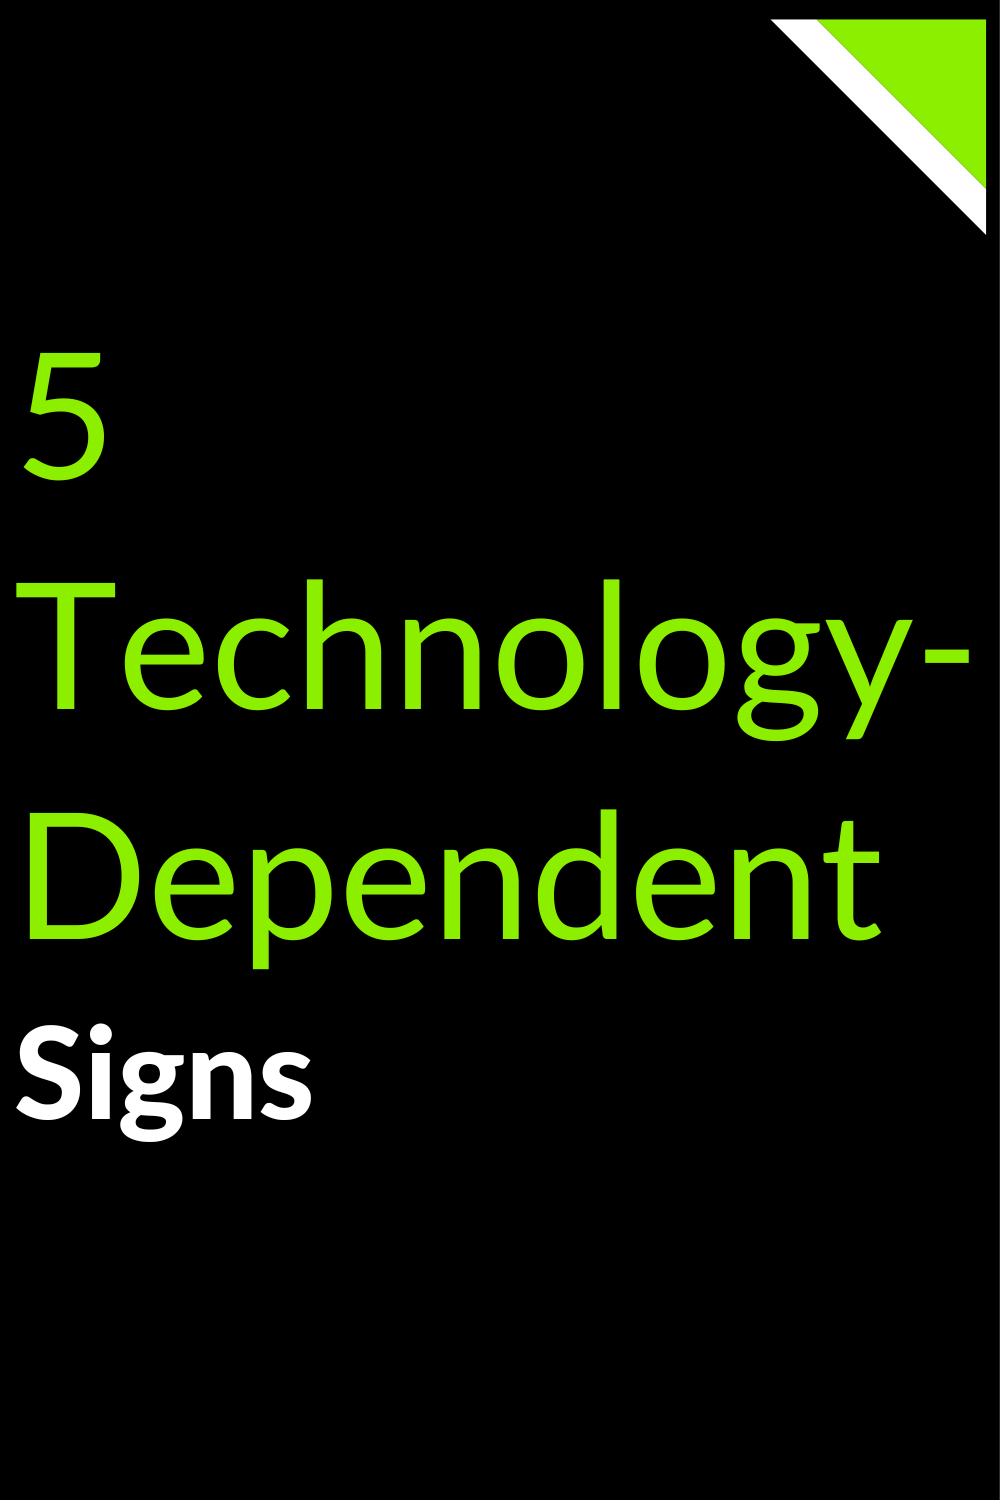 5 Technology-Dependent Signs